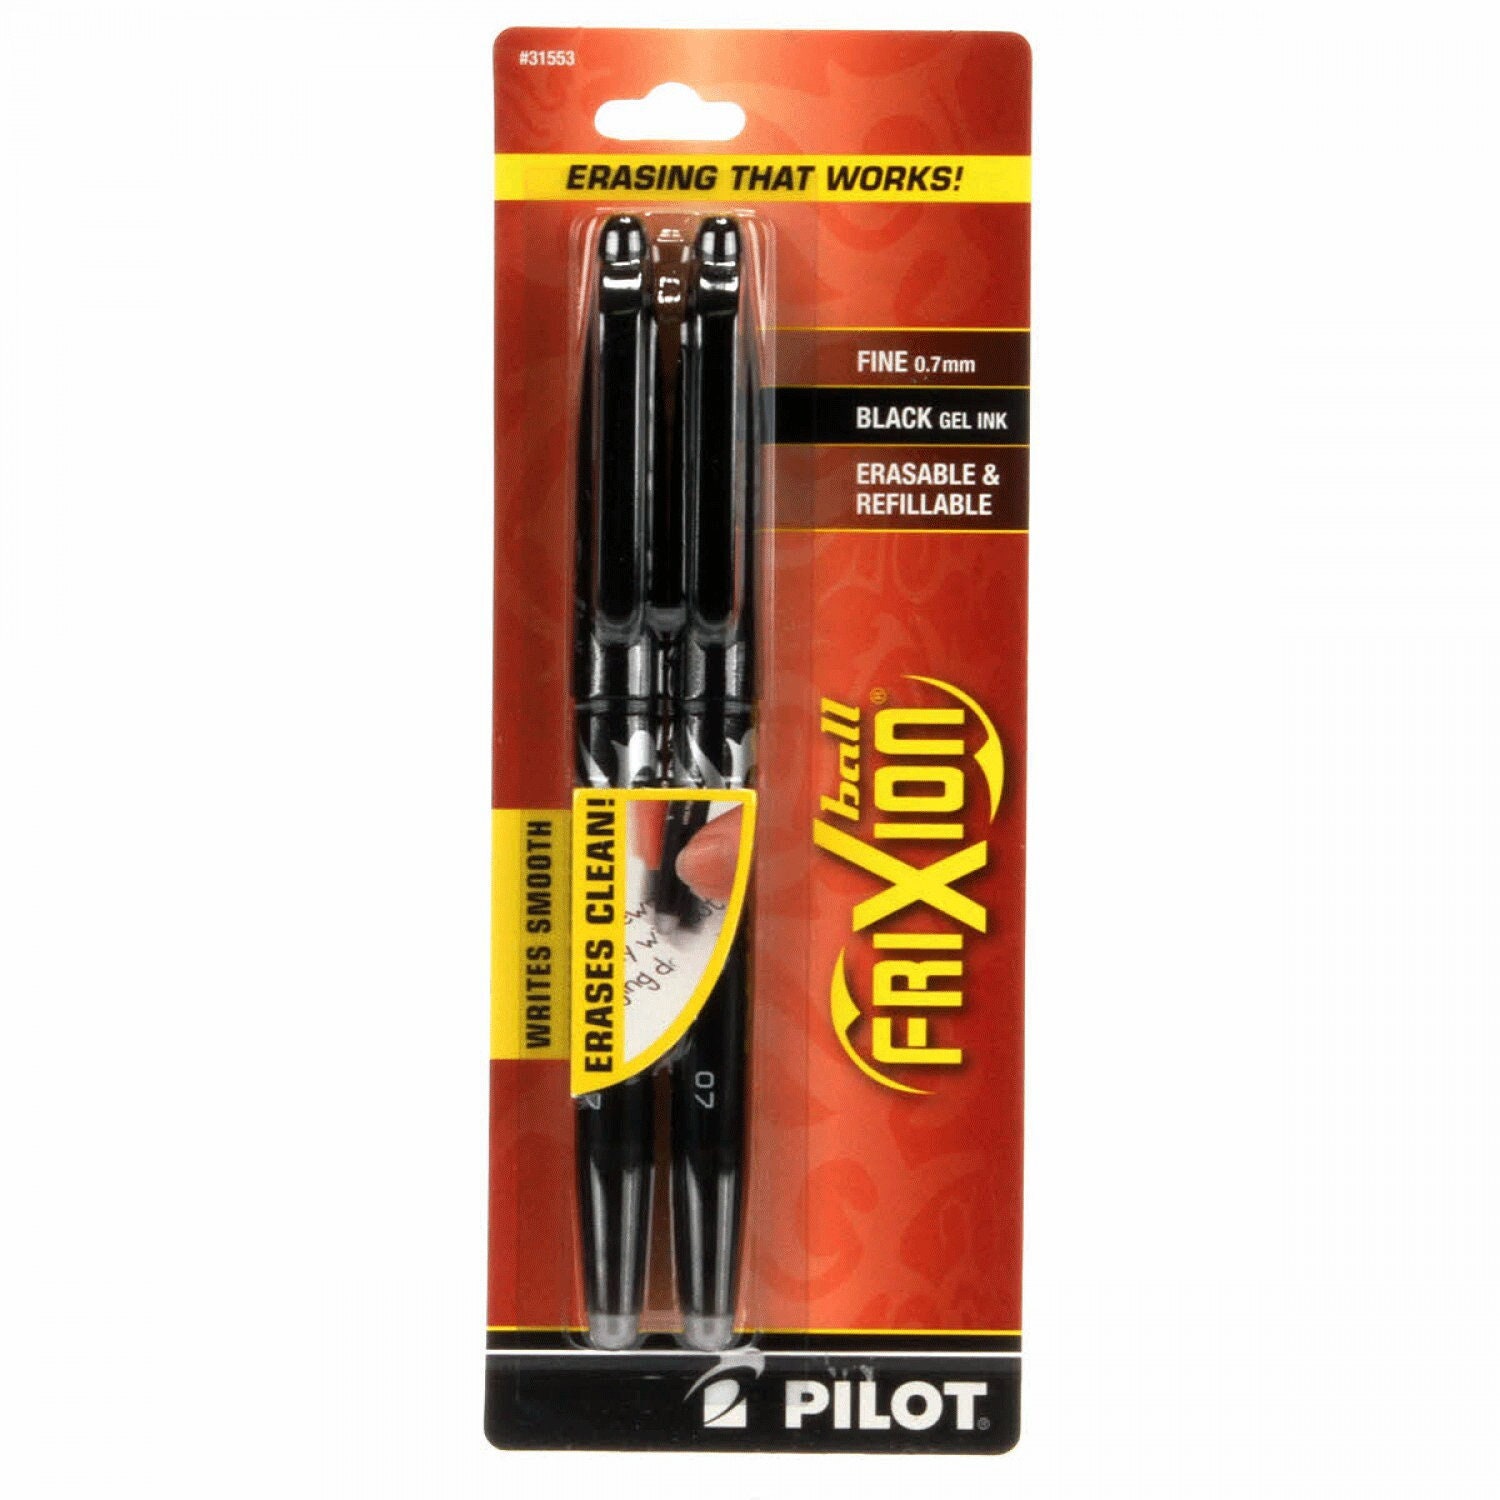 DRITZ #677-60 DISAPPEARING INK MARKING PEN